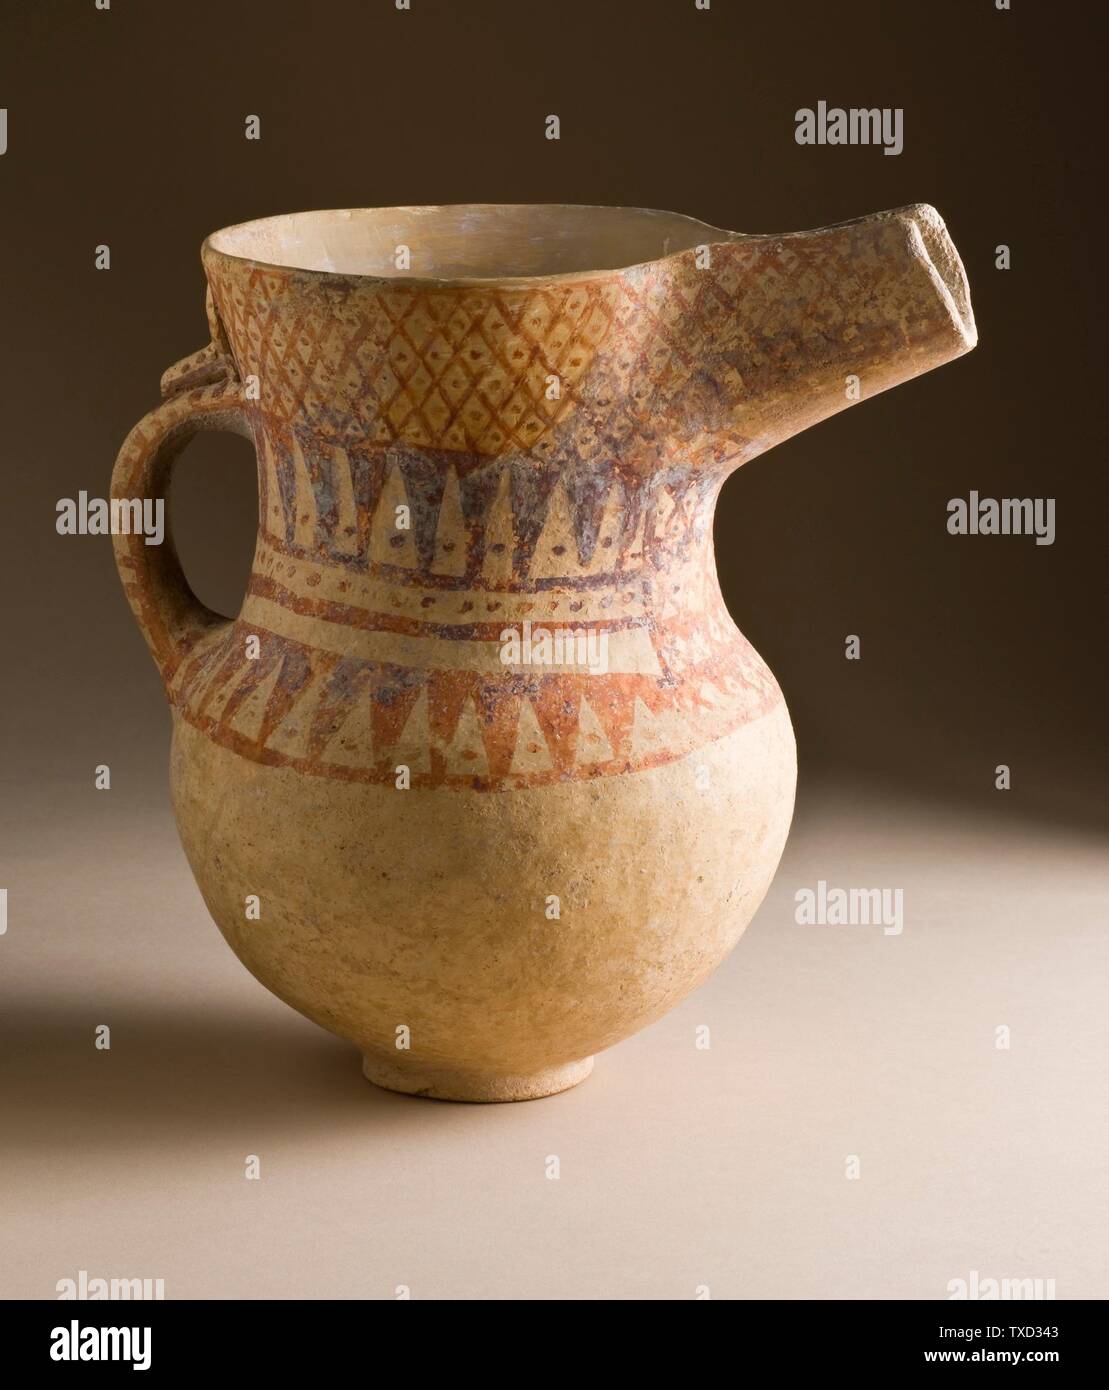 Buff Ware High Resolution Stock Photography and Images - Alamy